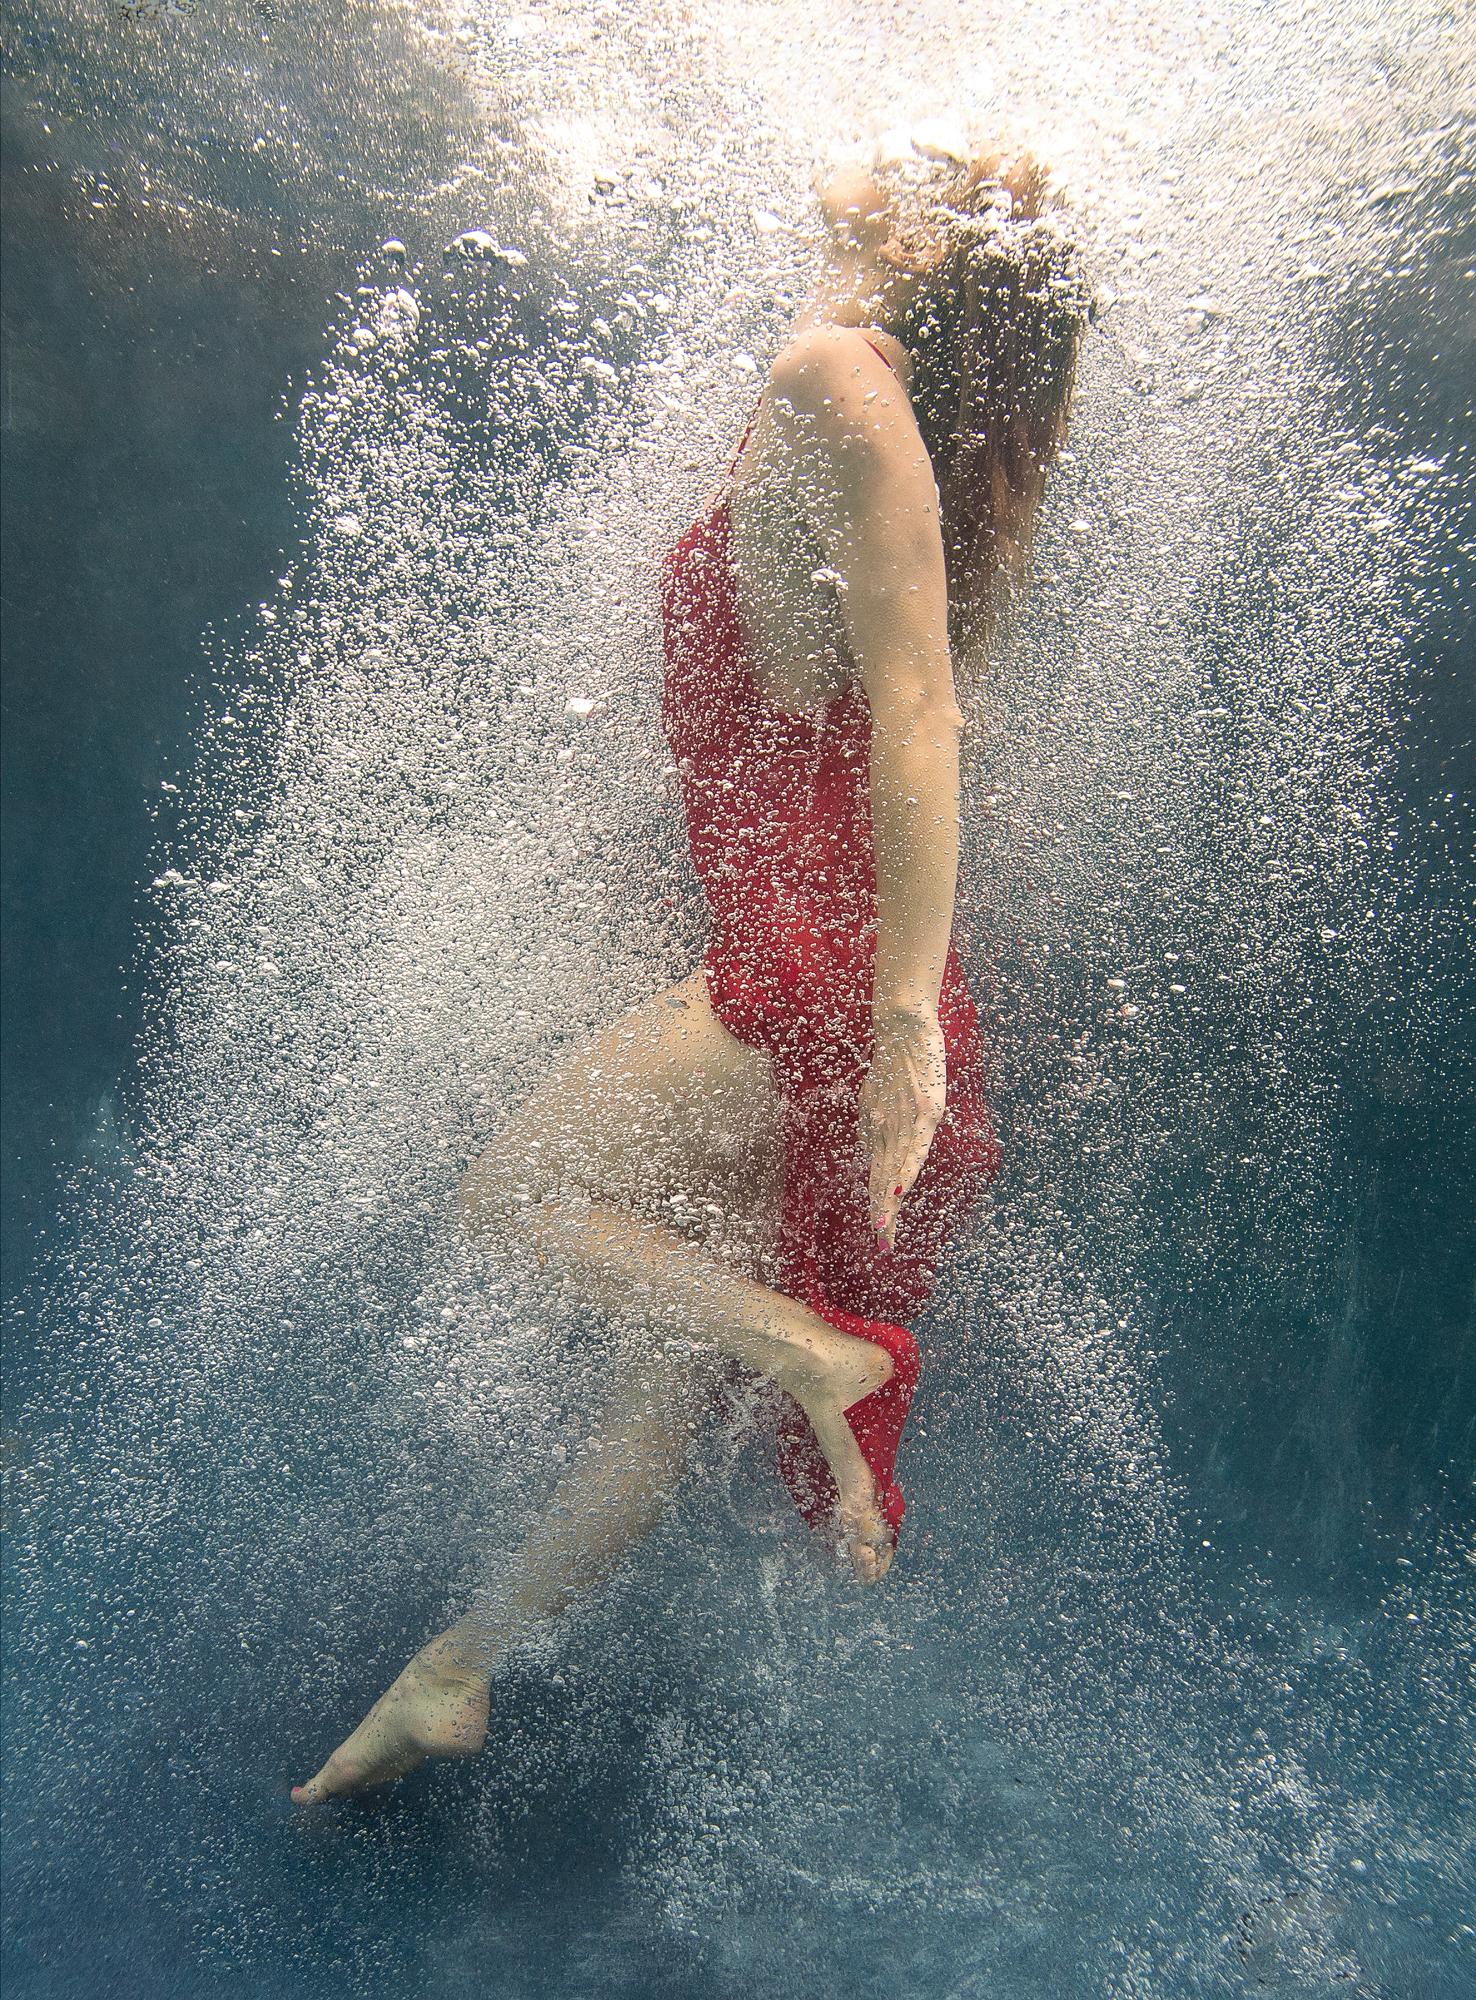 Alex Sher Color Photograph - Coming Back - underwater photograph - archival pigment print 24x18"